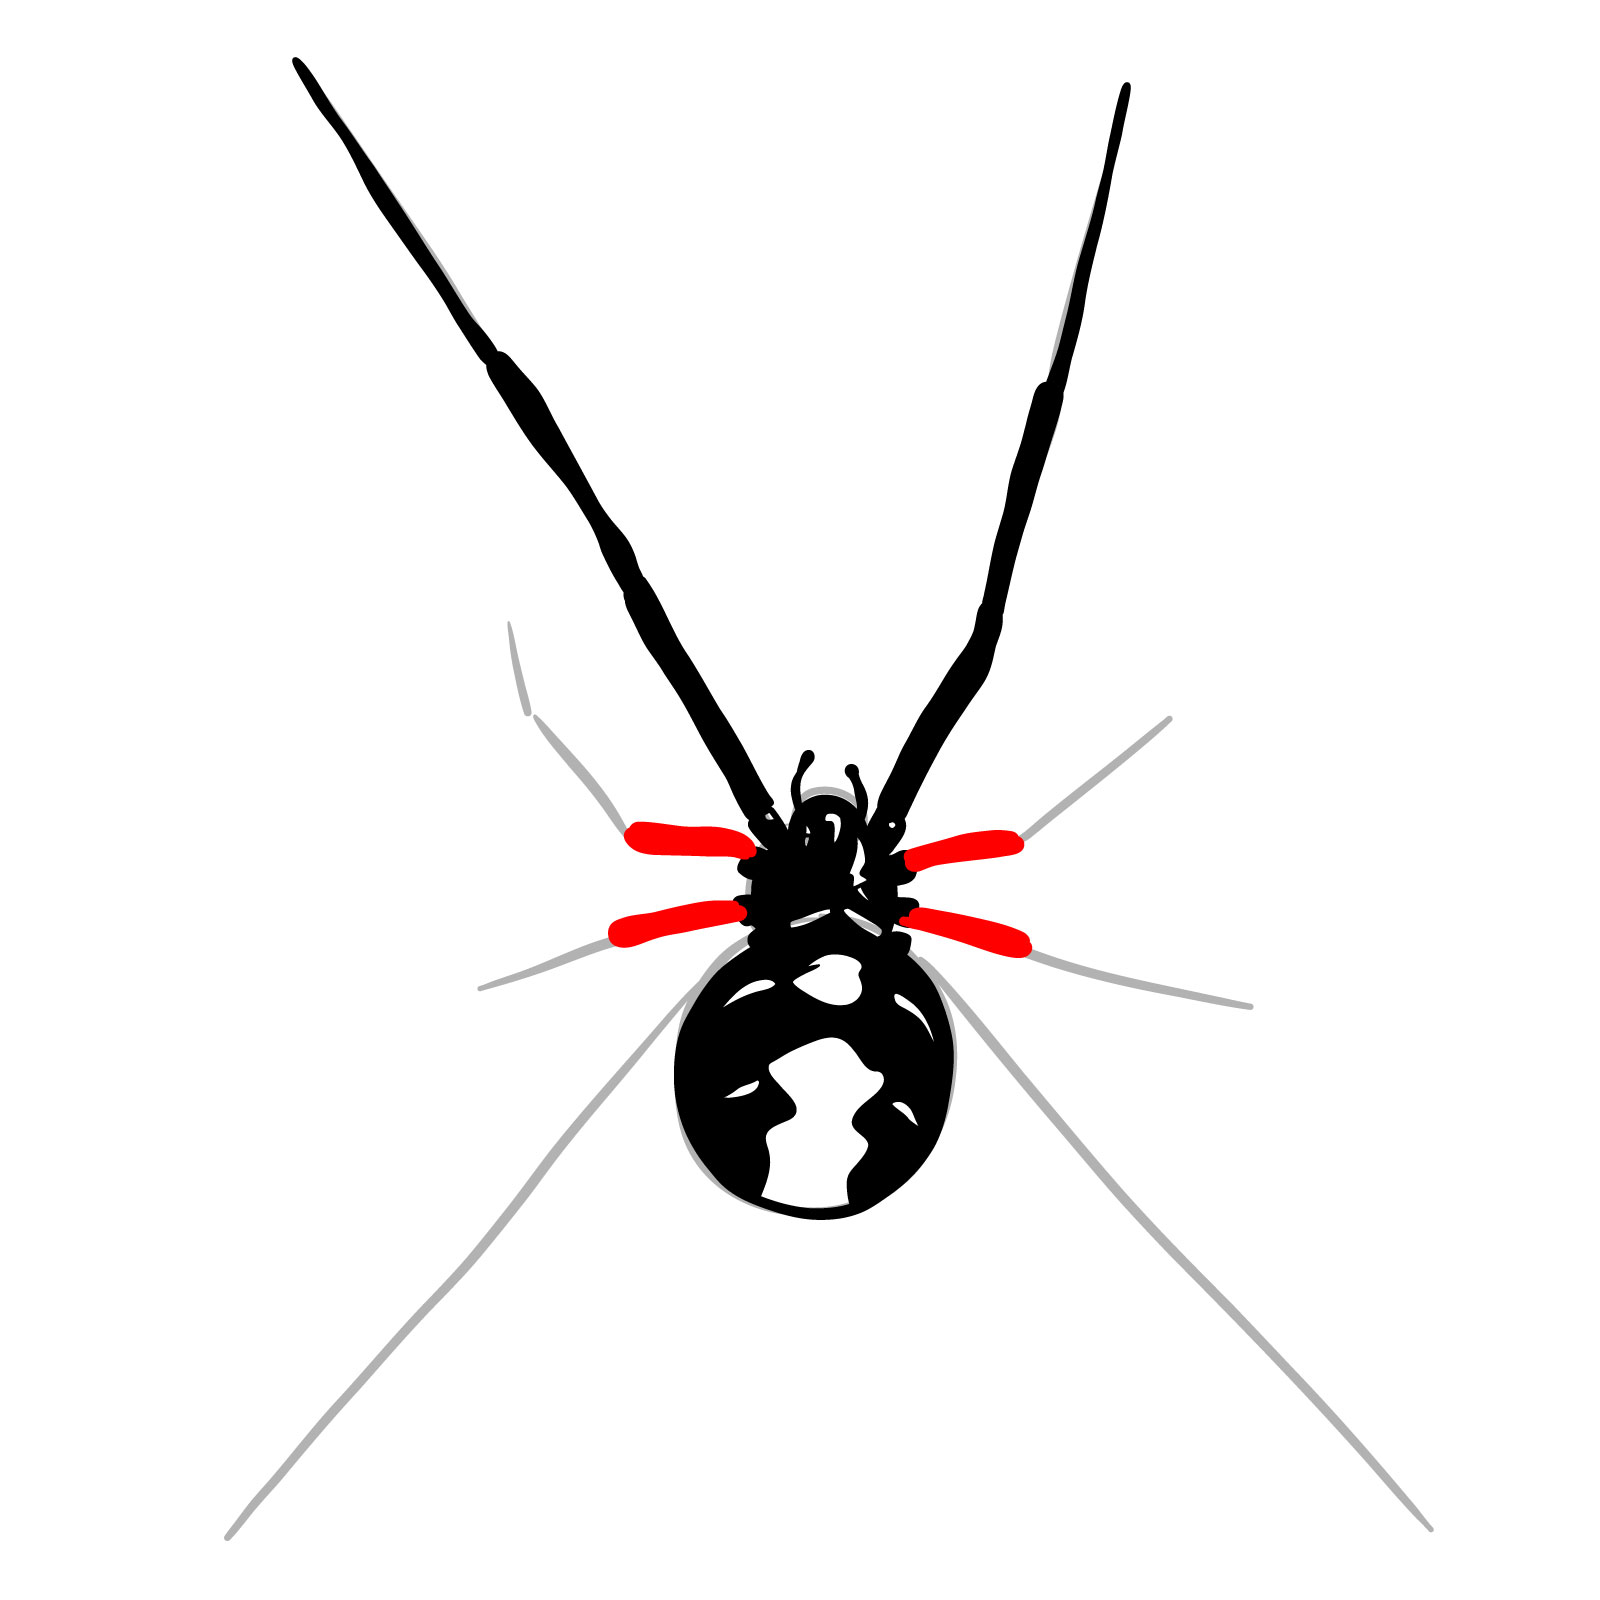 How to draw a Black Widow Spider - step 14